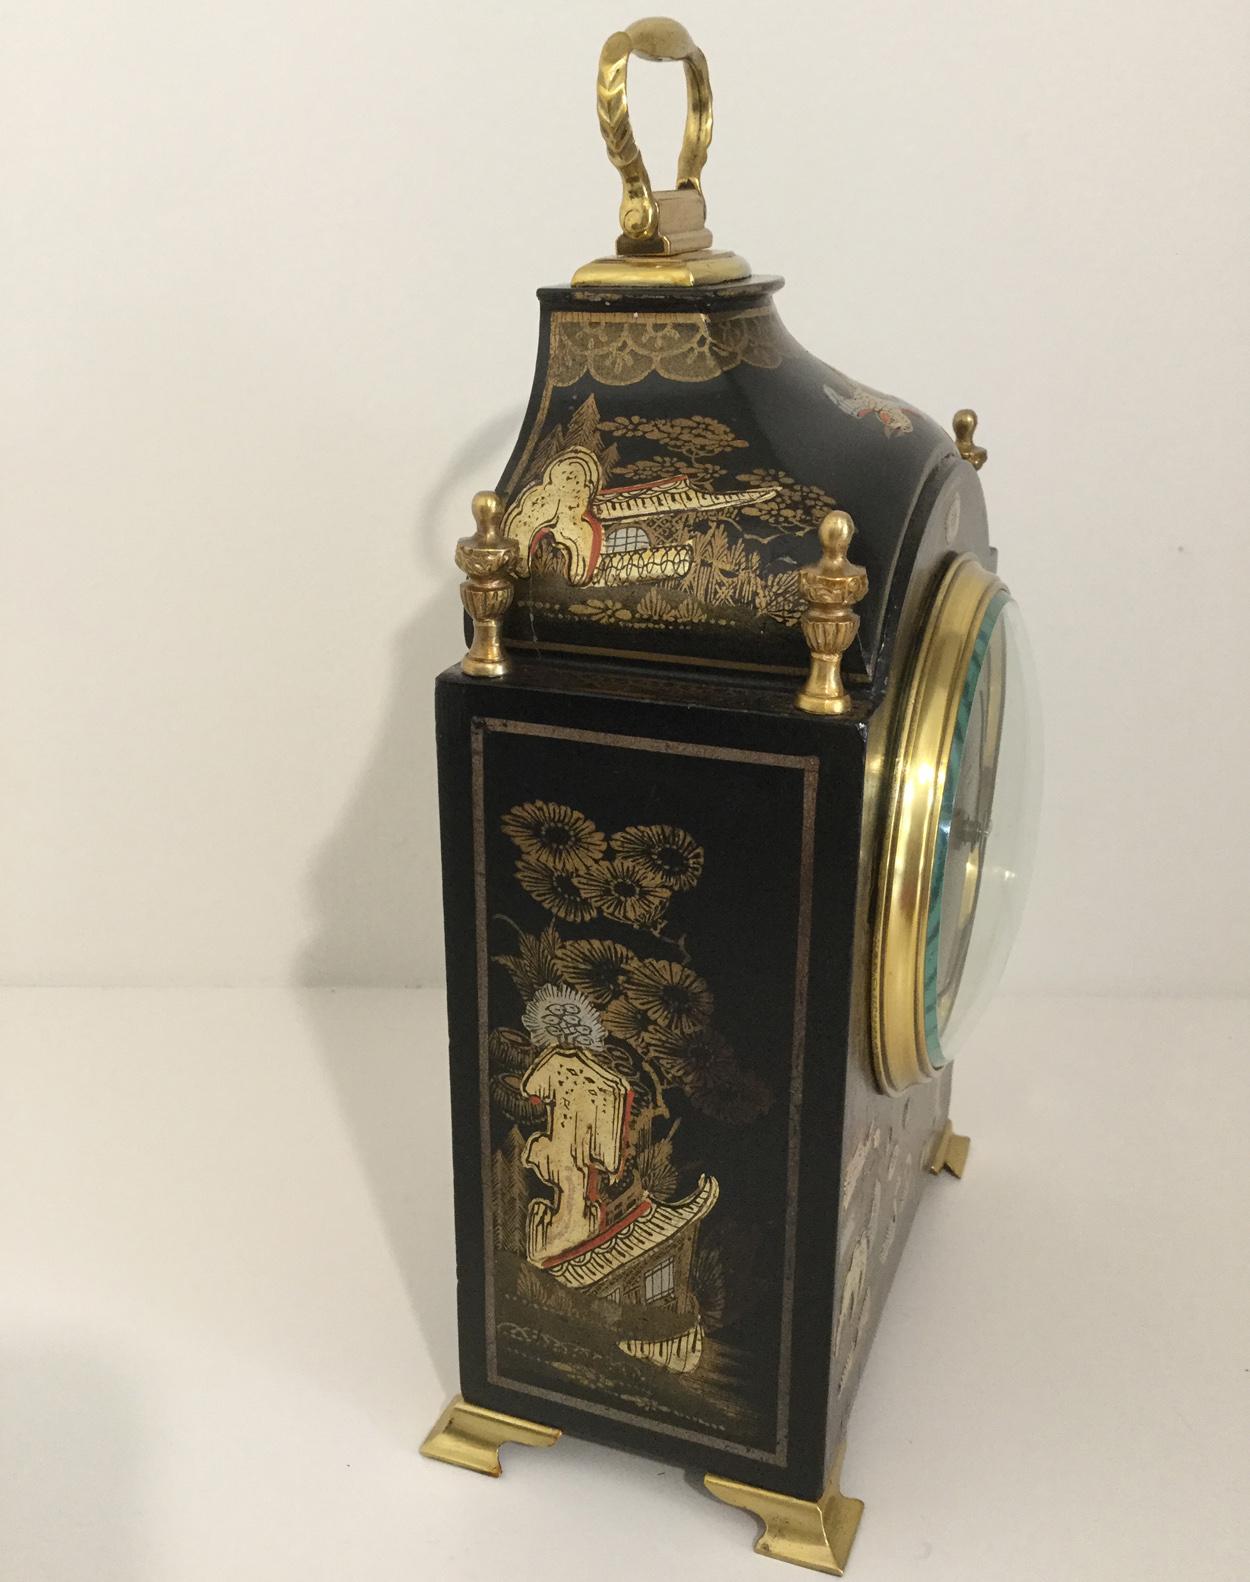 A highly decorative small black chinoiserie bracket clock, circa 1920, the case profusely decorated in relief with maidens, floral, bird and garden scenes, the swept top with four brass finials and a brass loop handle, on brass ogee feet. The gold